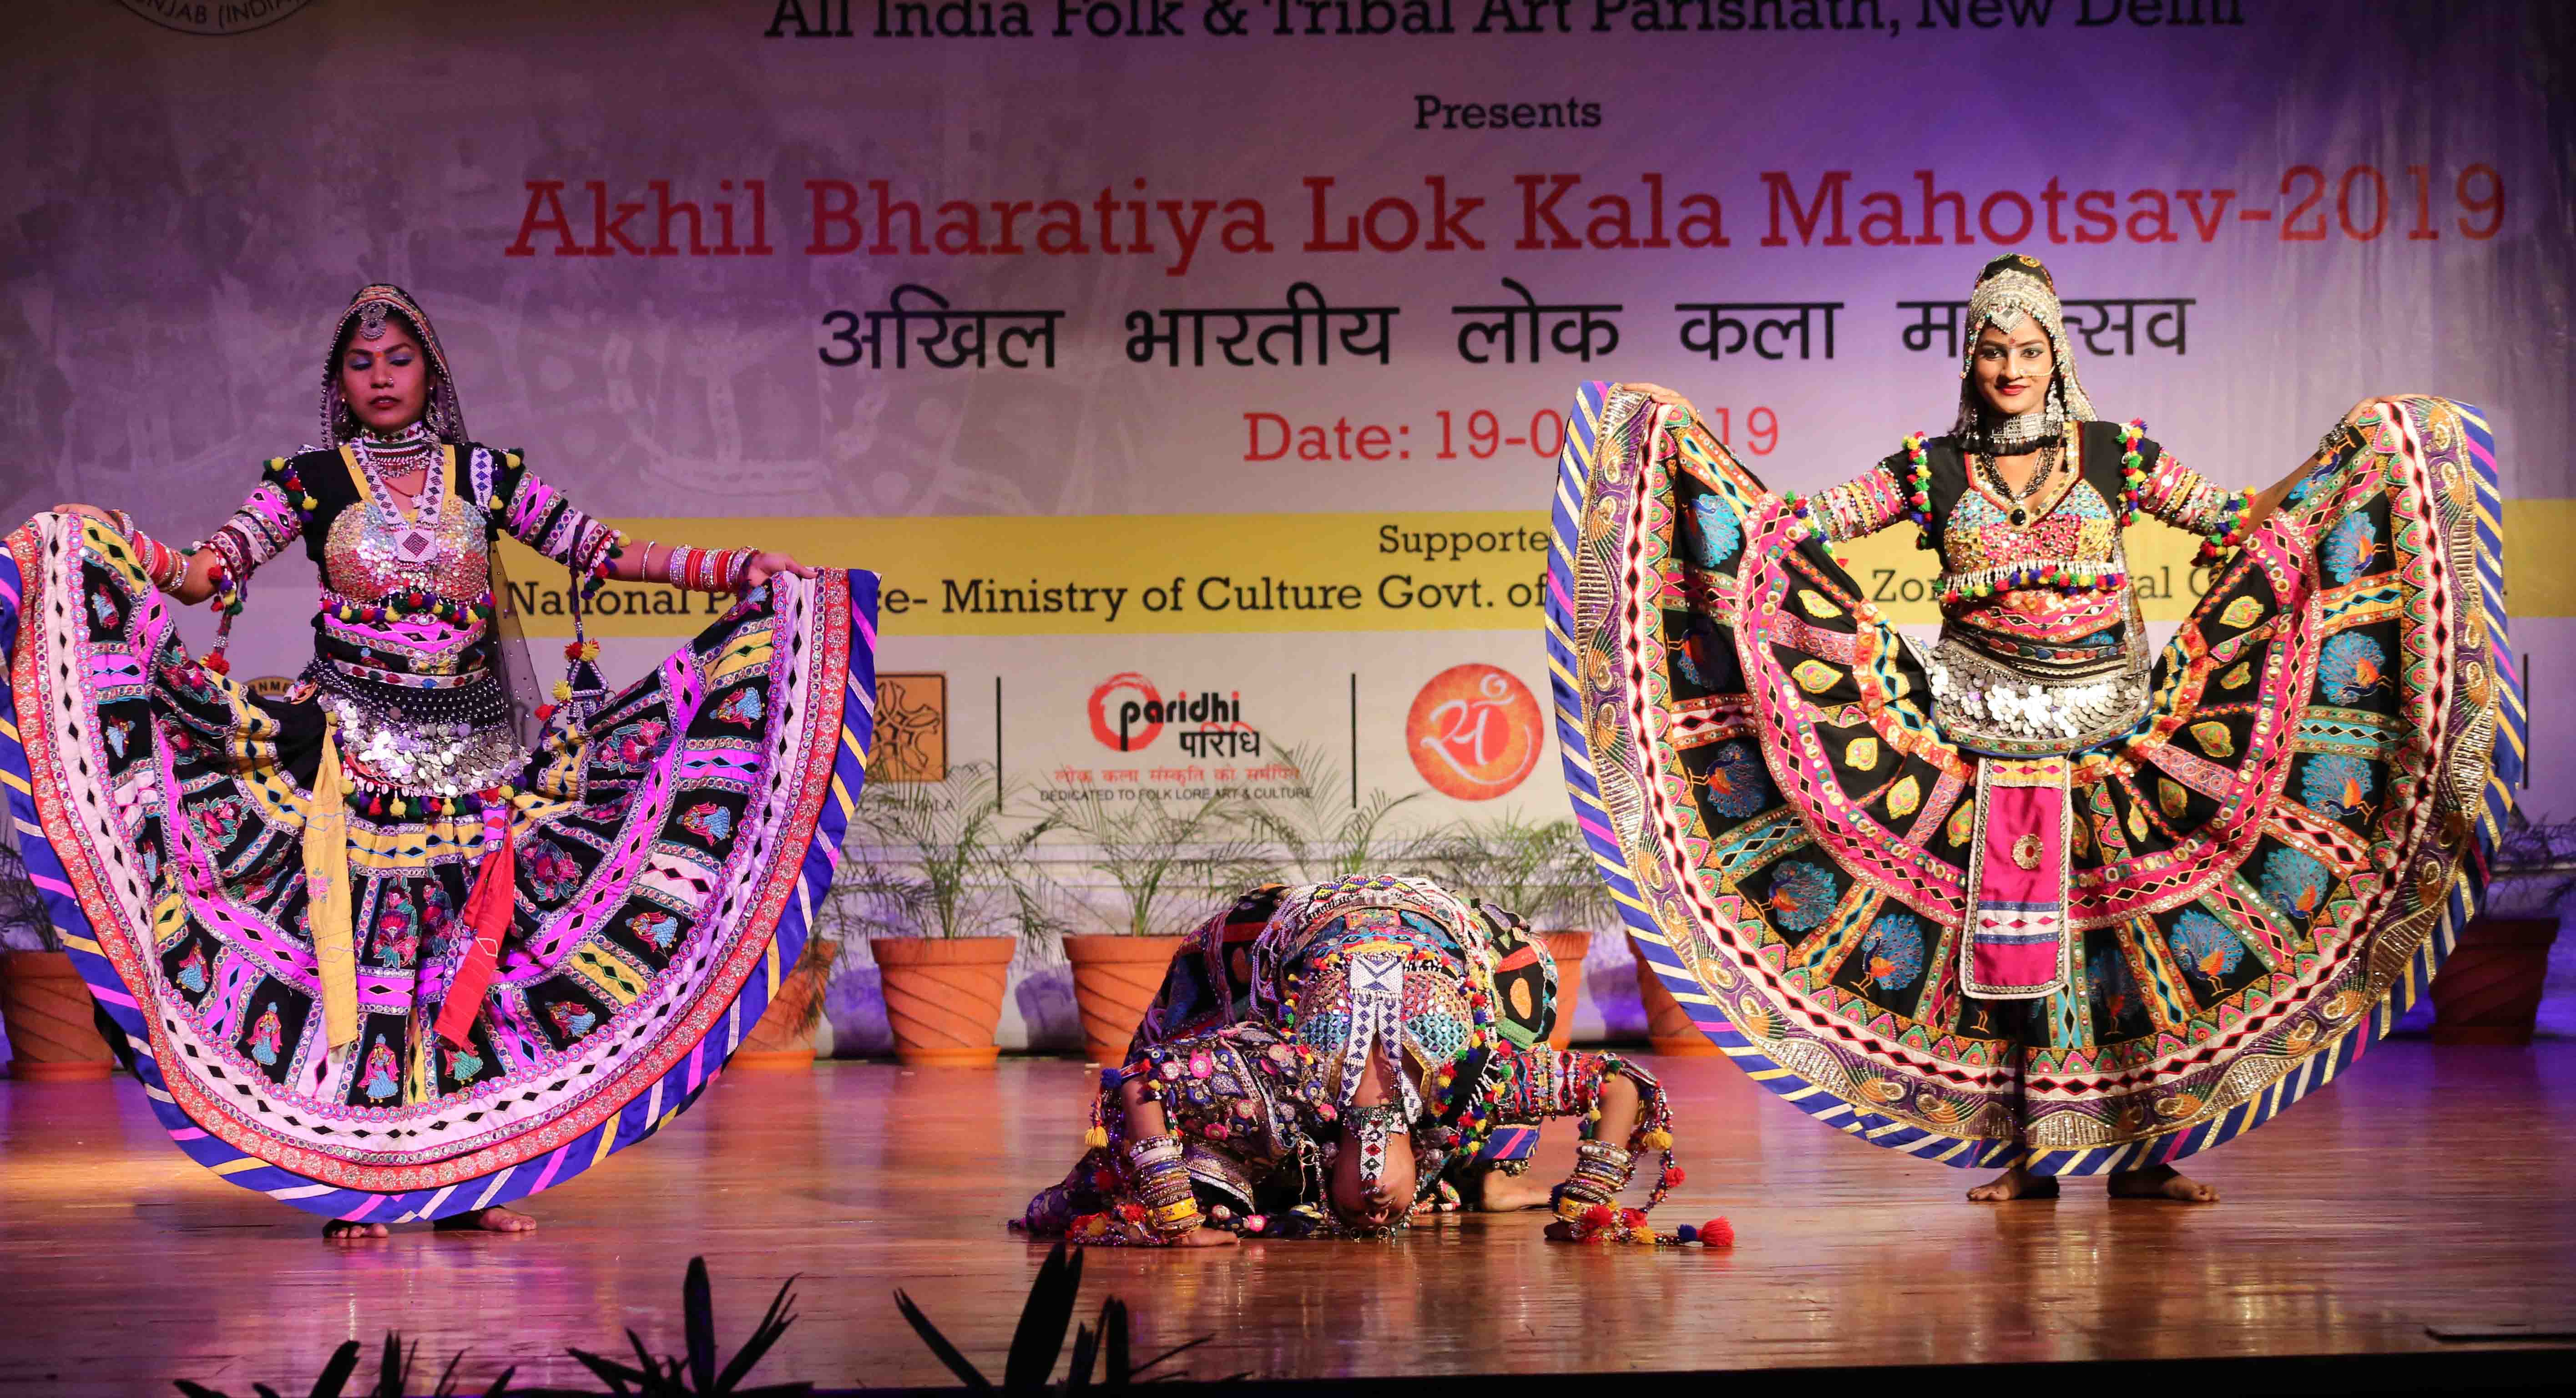 Scenes of Indian folk dances as performed by professionals at LPU